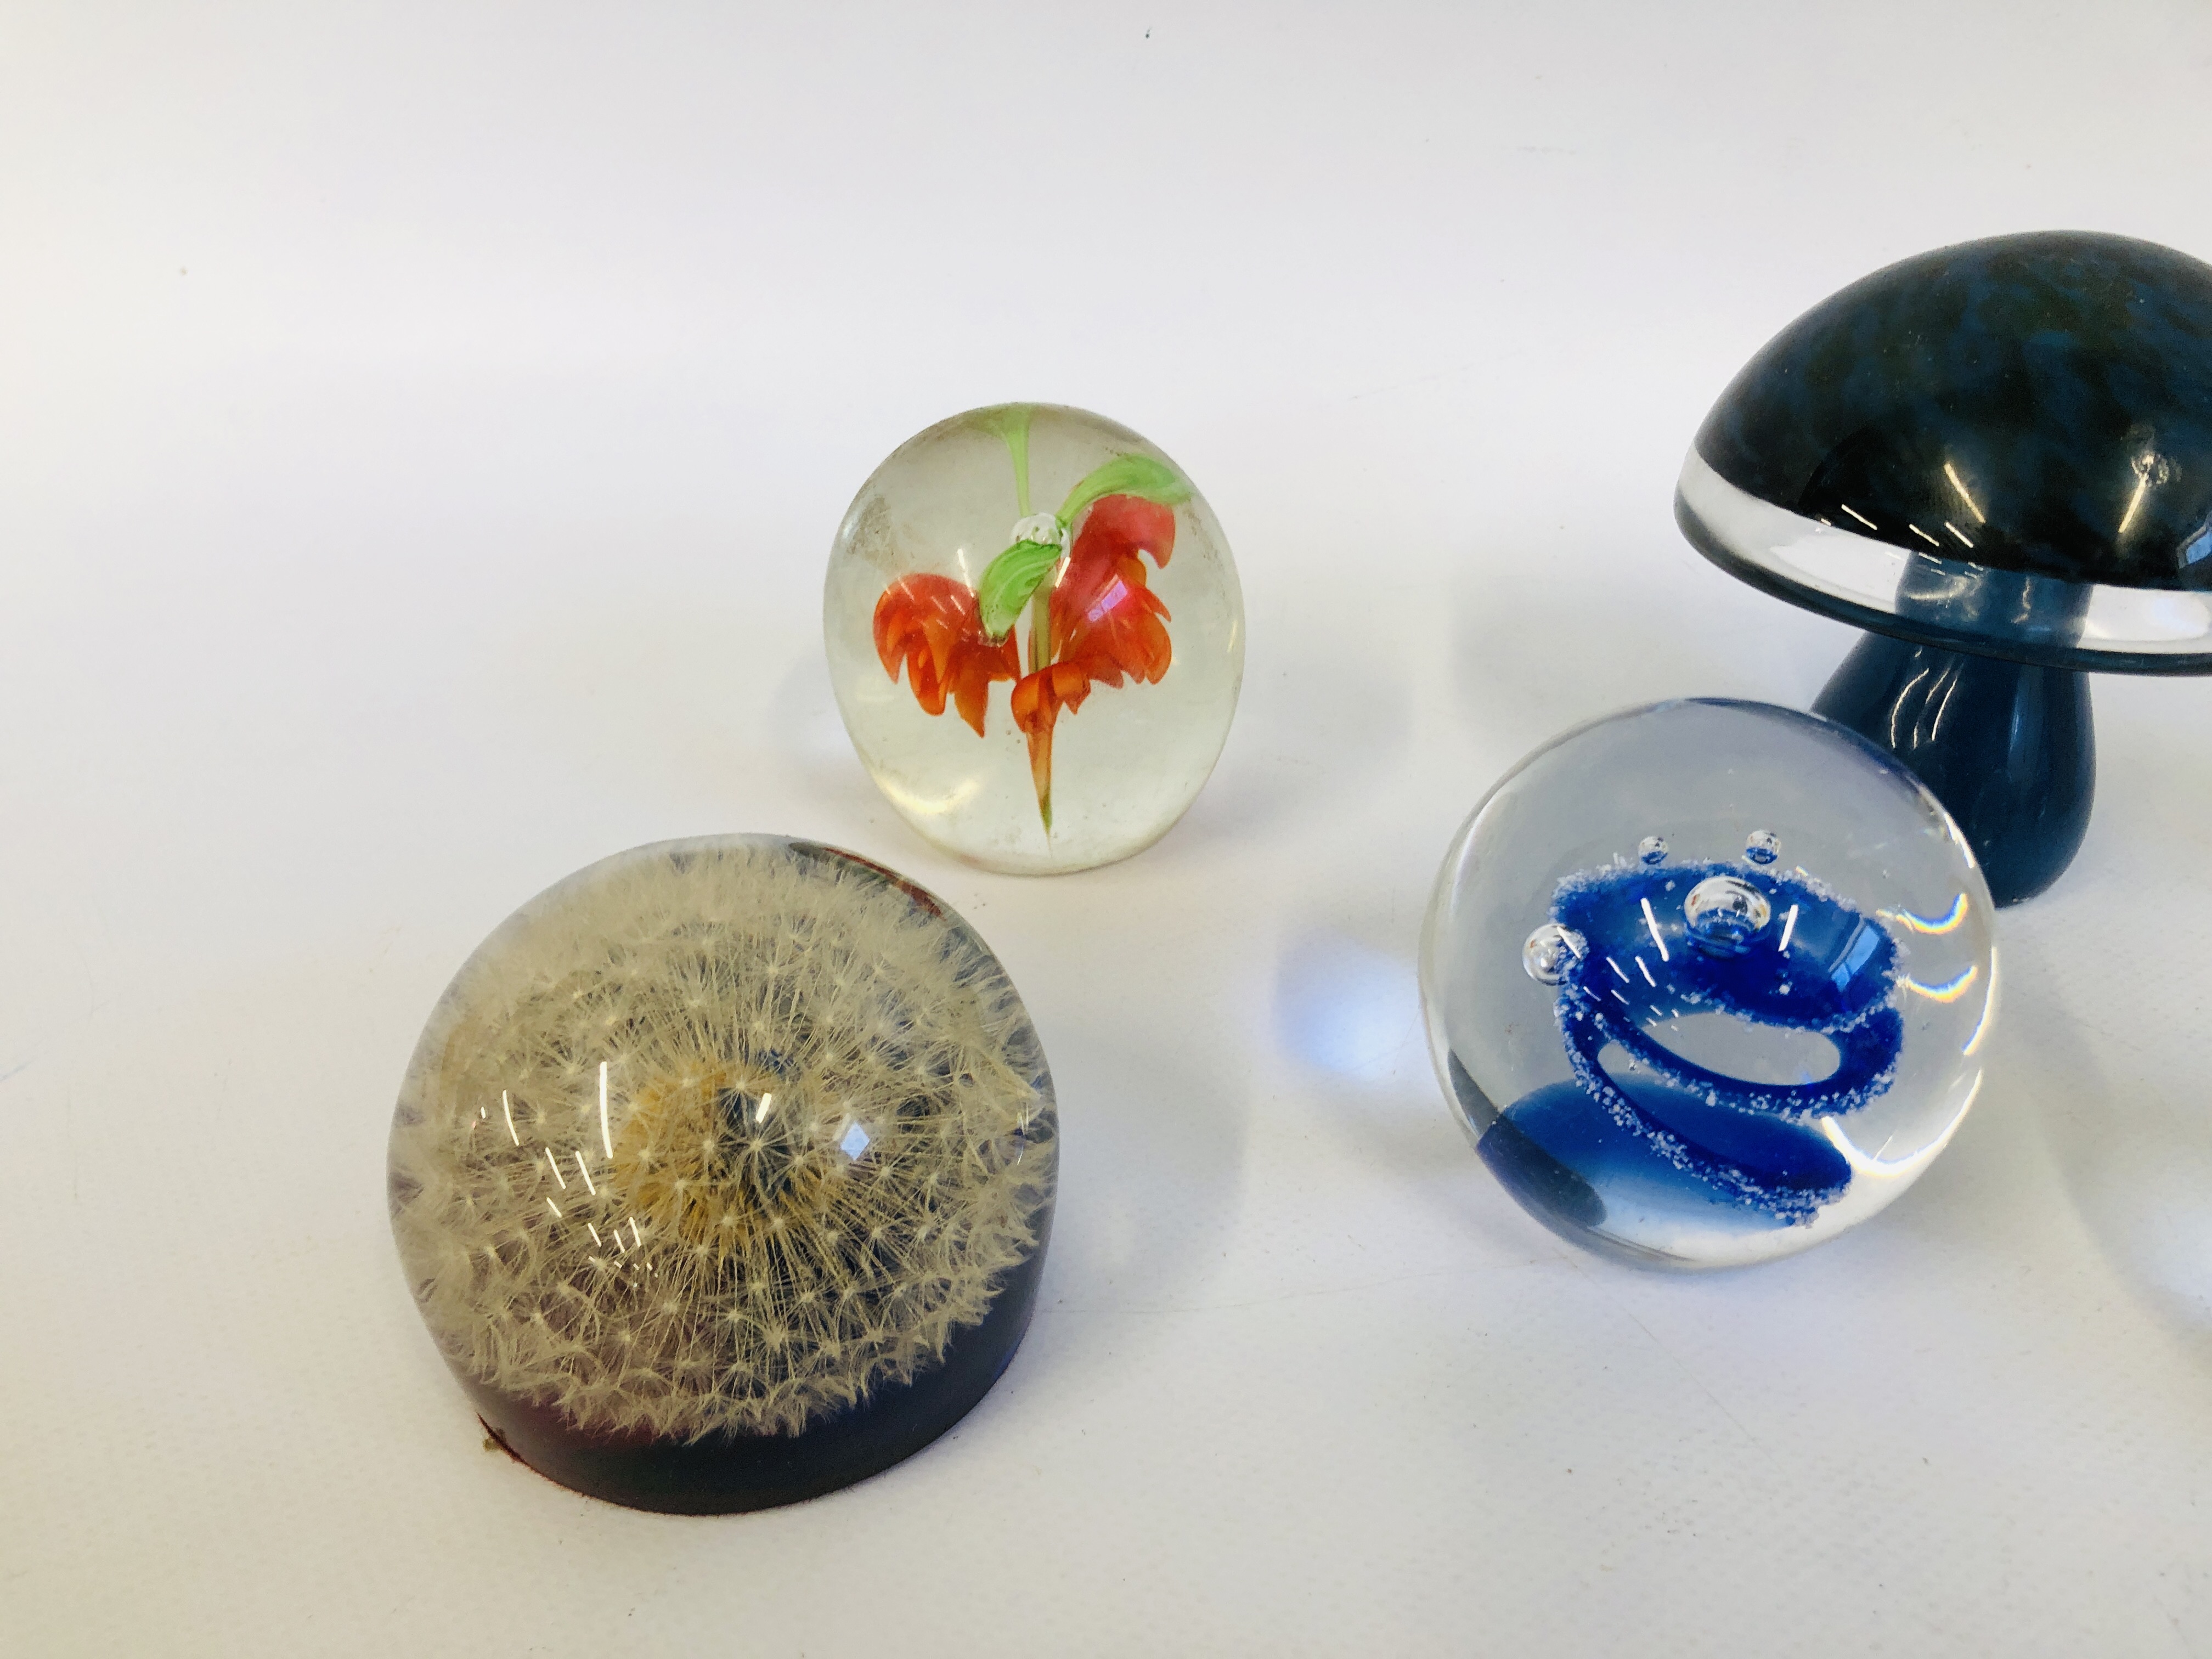 COLLECTION OF 8 ART GLASS PAPERWEIGHTS TO INCLUDE WEDGWOOD MUSHROOM, KERRY GLASS, ETC. - Image 2 of 4